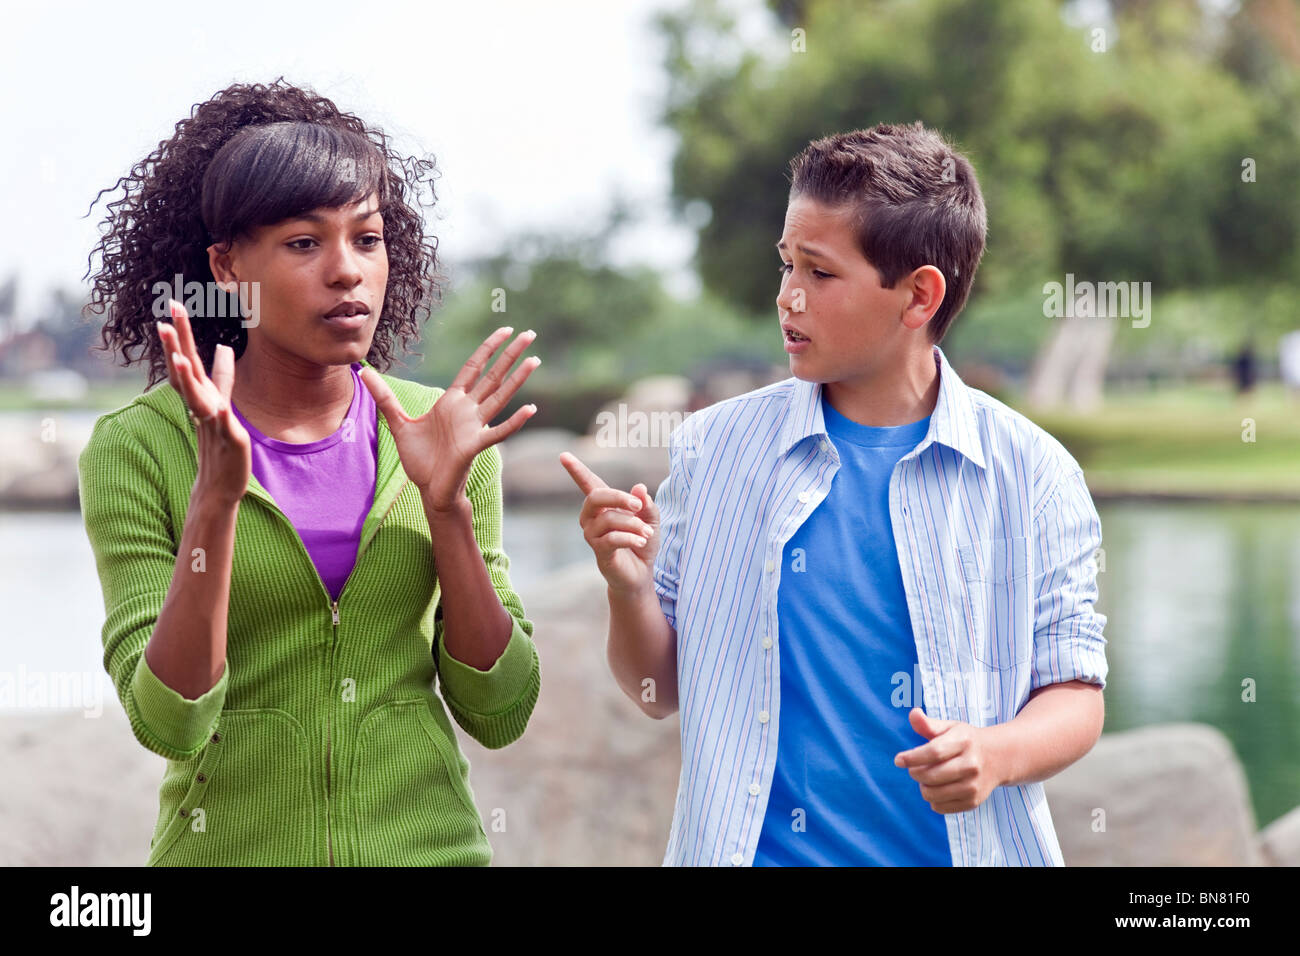 California Multi ethnic racial Ethnically diverseTeens hanging out gesturing Teenagers African American Girl Caucasian boy talking.MR ©Myrleen Pearson Stock Photo